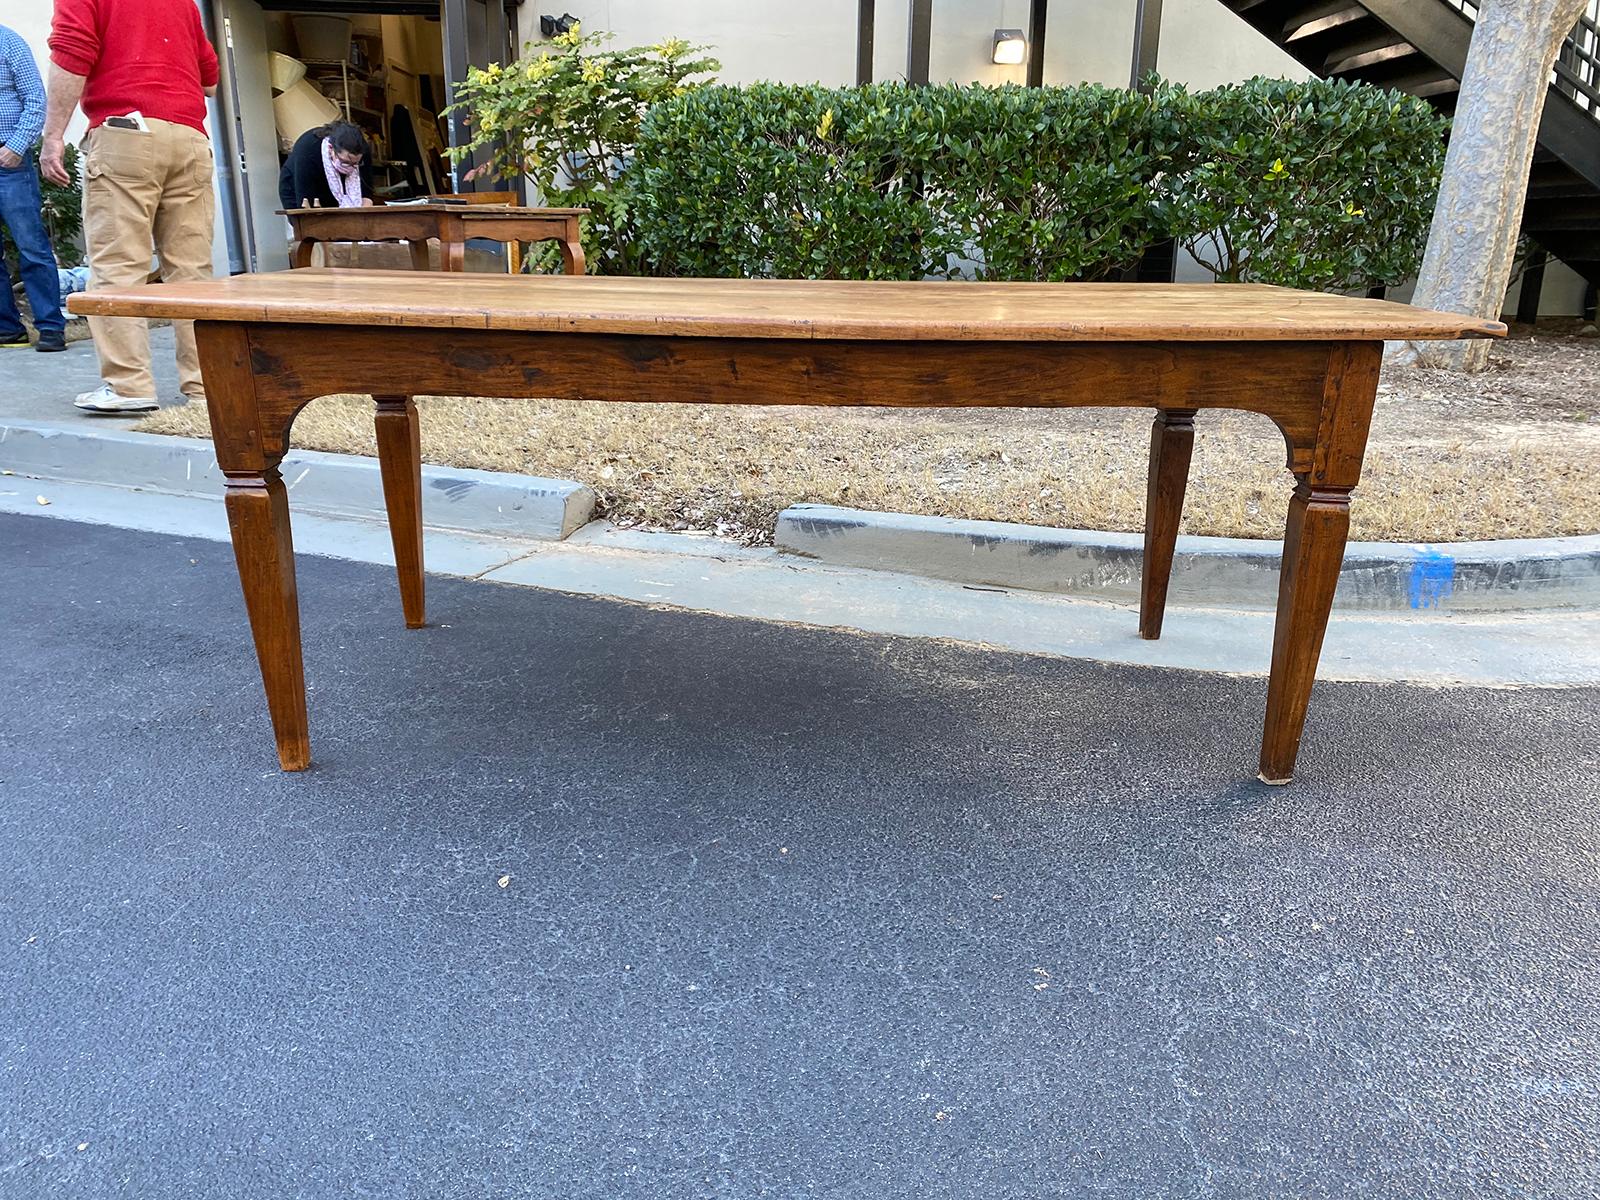 Large 19th century French three board farm table / dining table. Wonderful patina, great proportions / scale, good condition
Measure: Apron: 25